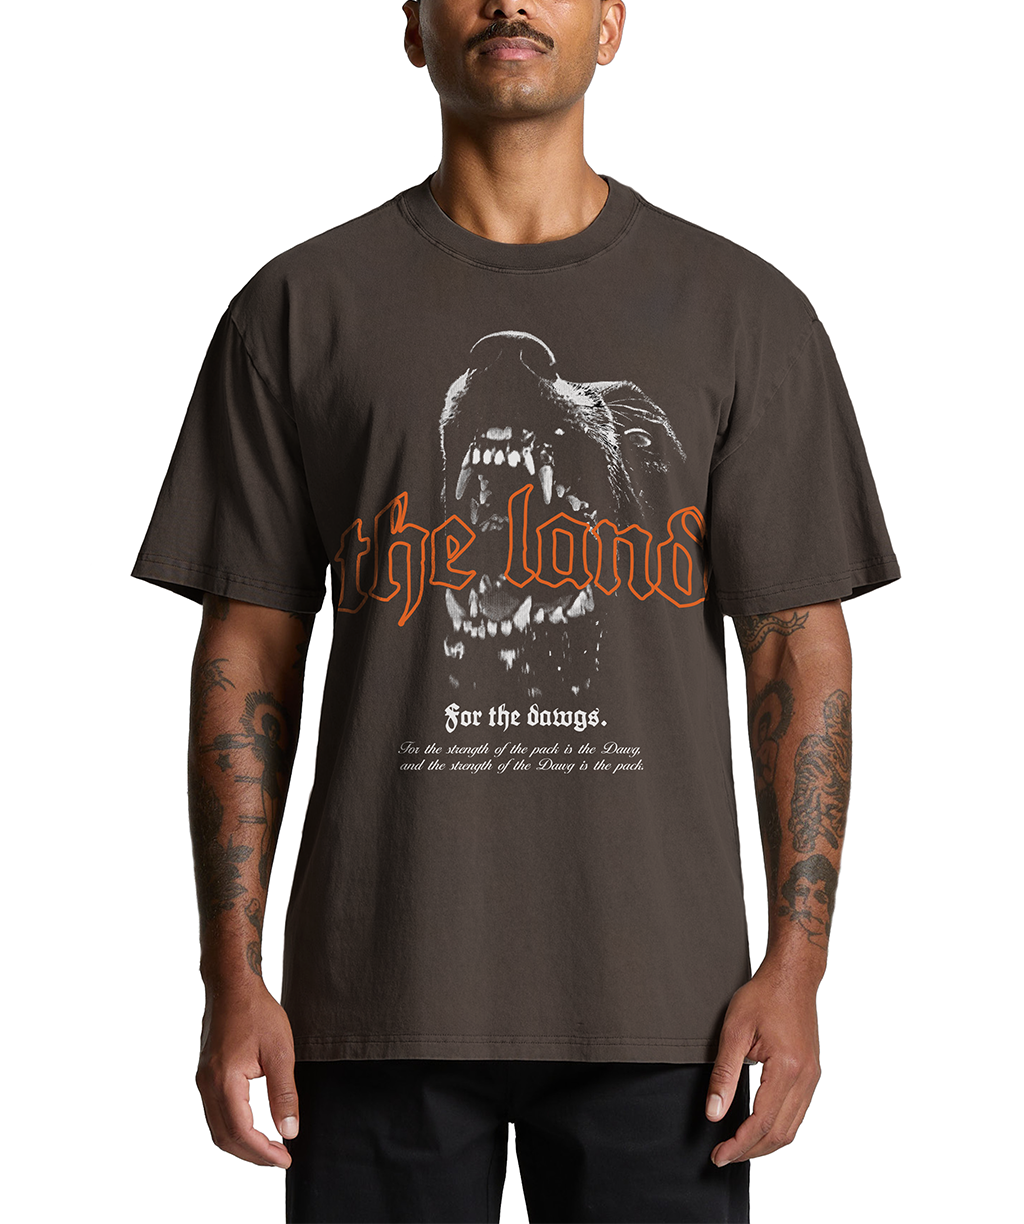 "For the Dawgs" T-shirt (Vintage Brown)